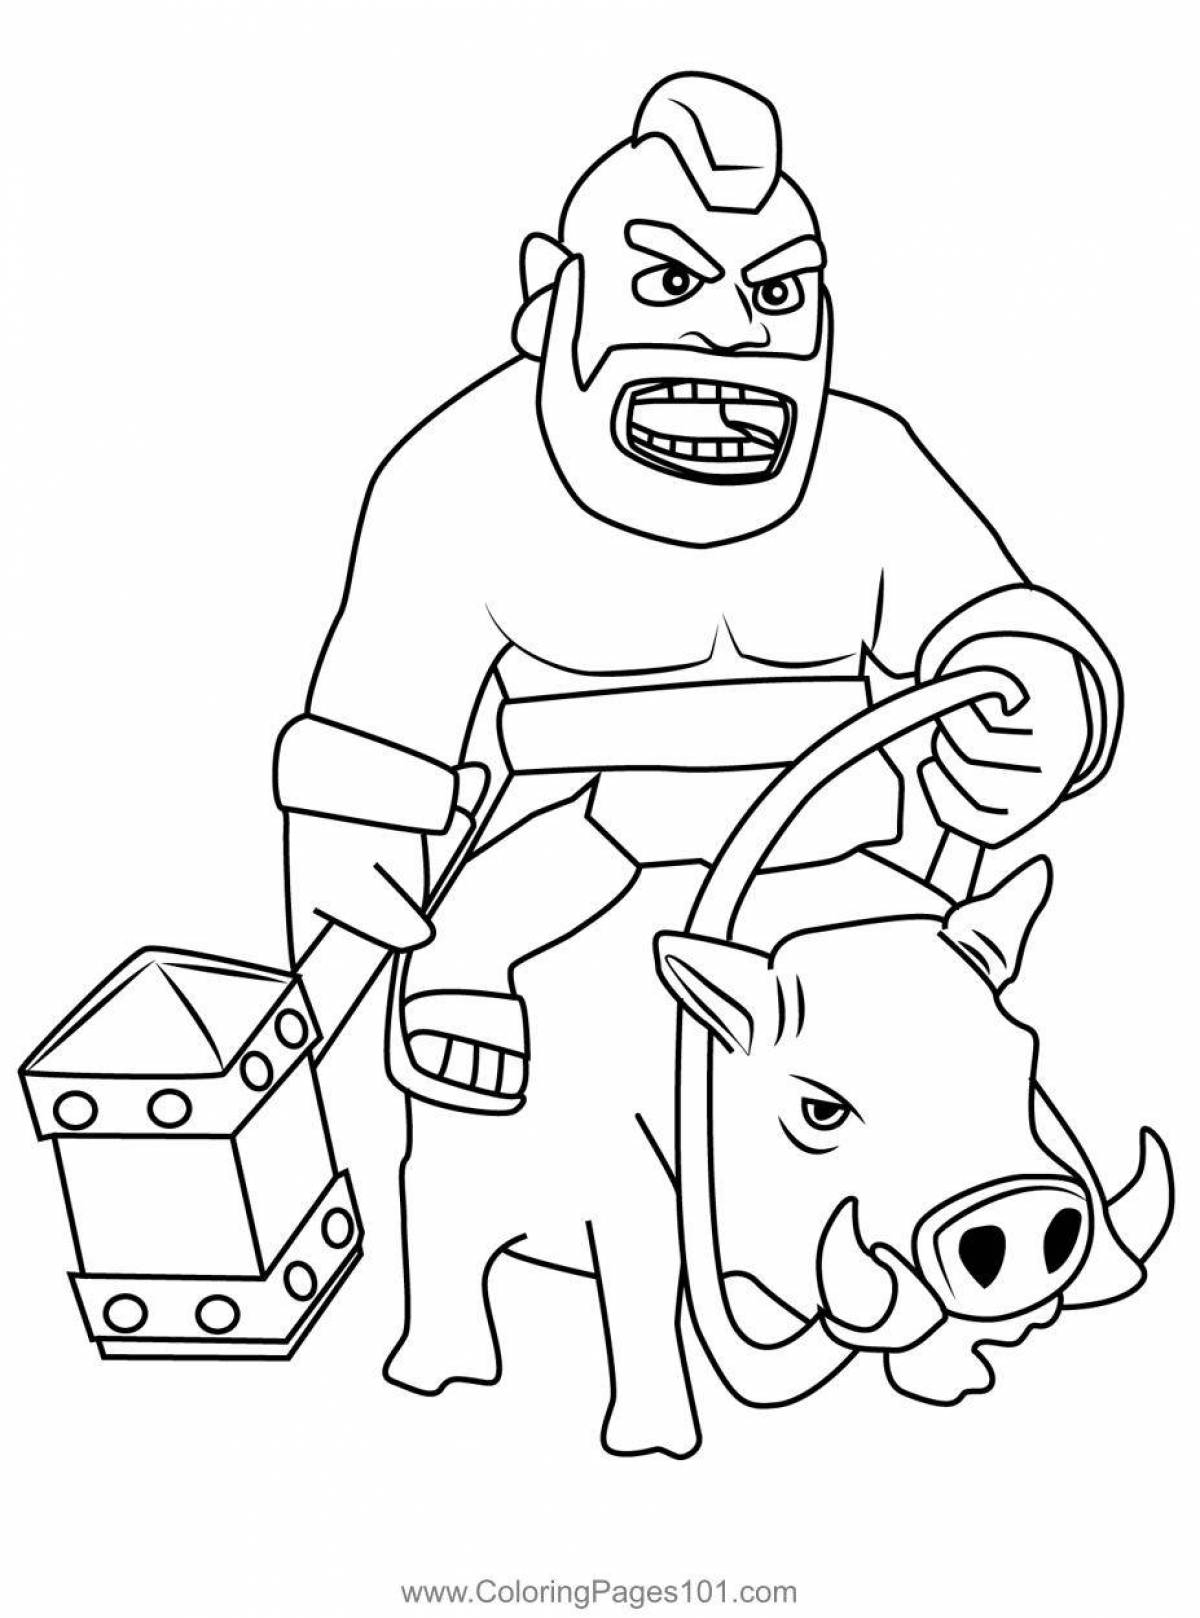 Clash of clans glitter coloring book